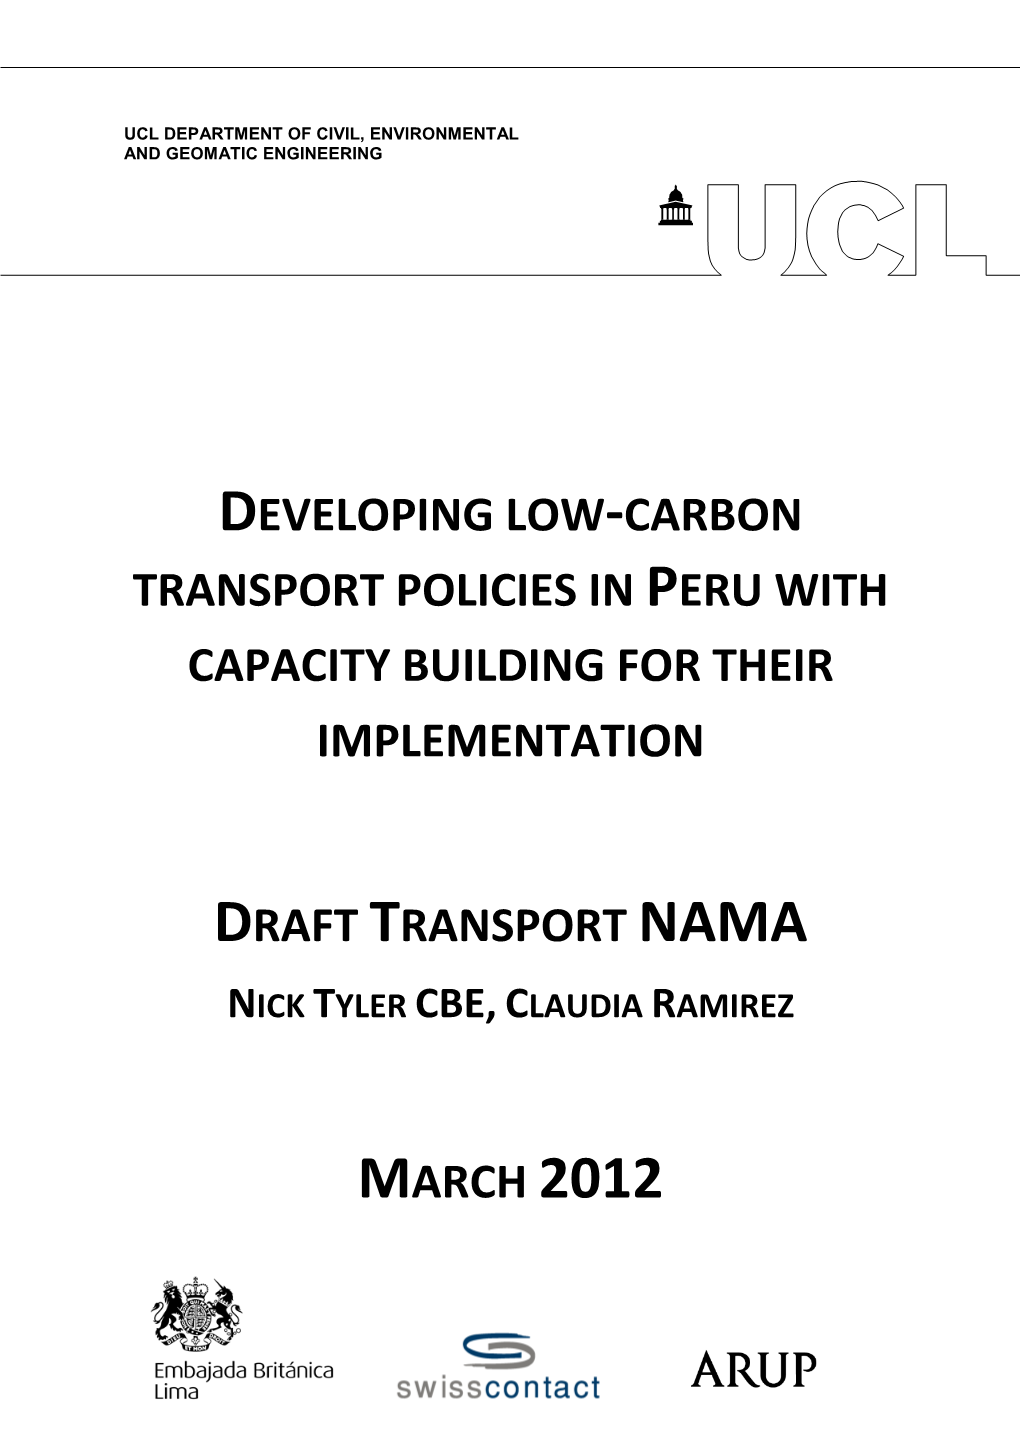 Transport Policies in Peru with Capacity Building for Their Implementation